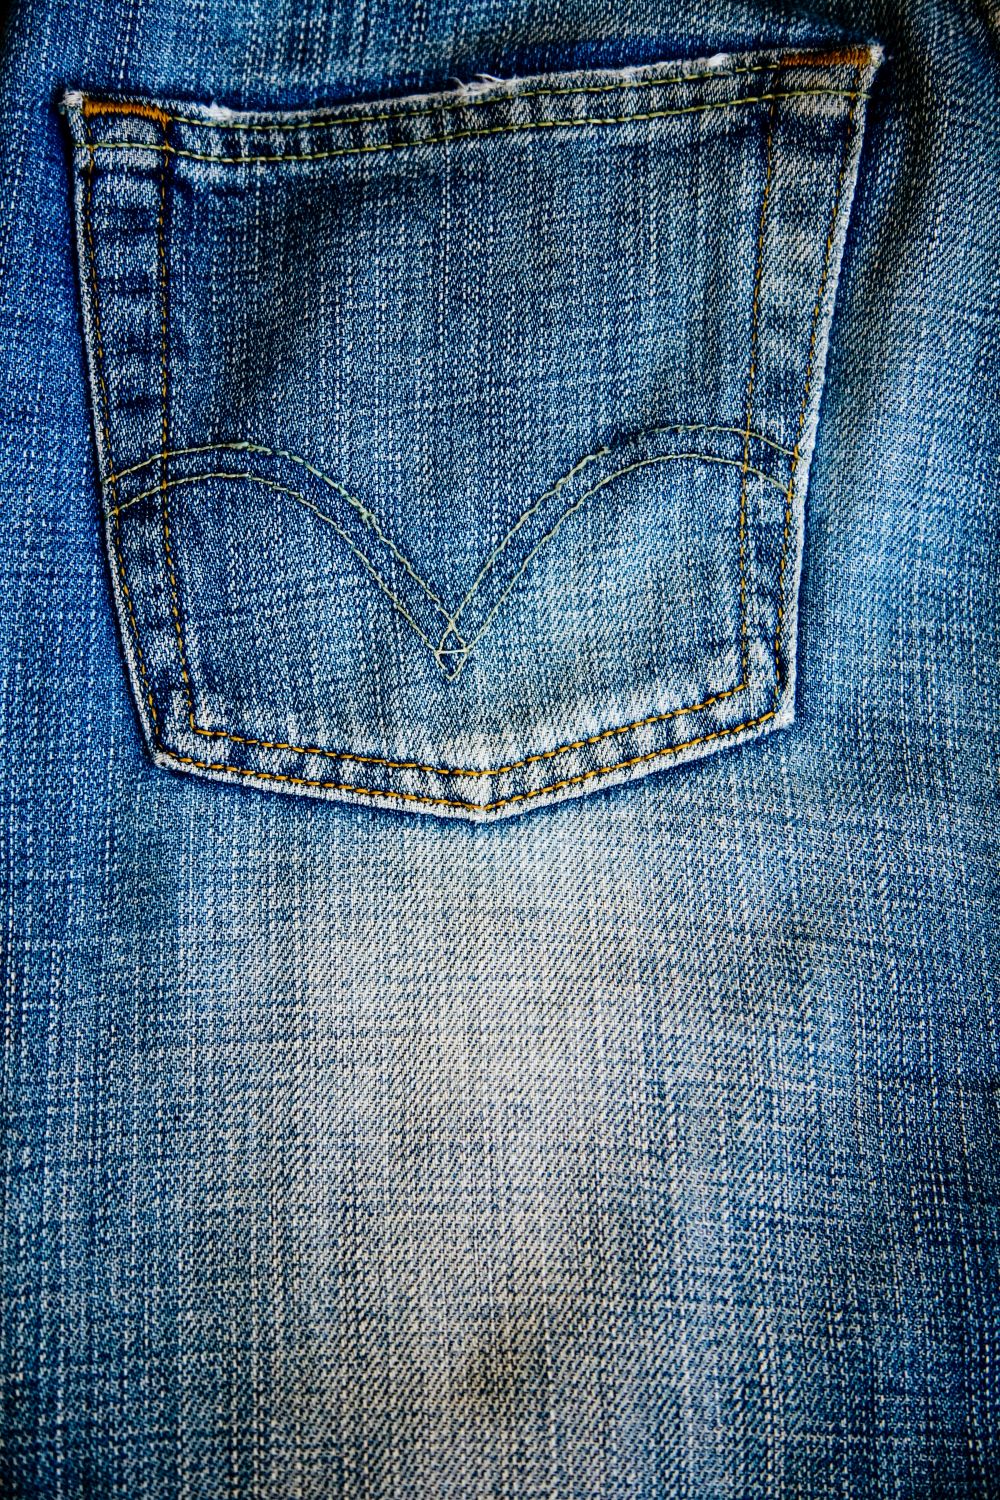 How to Make Your Jeans Last Longer